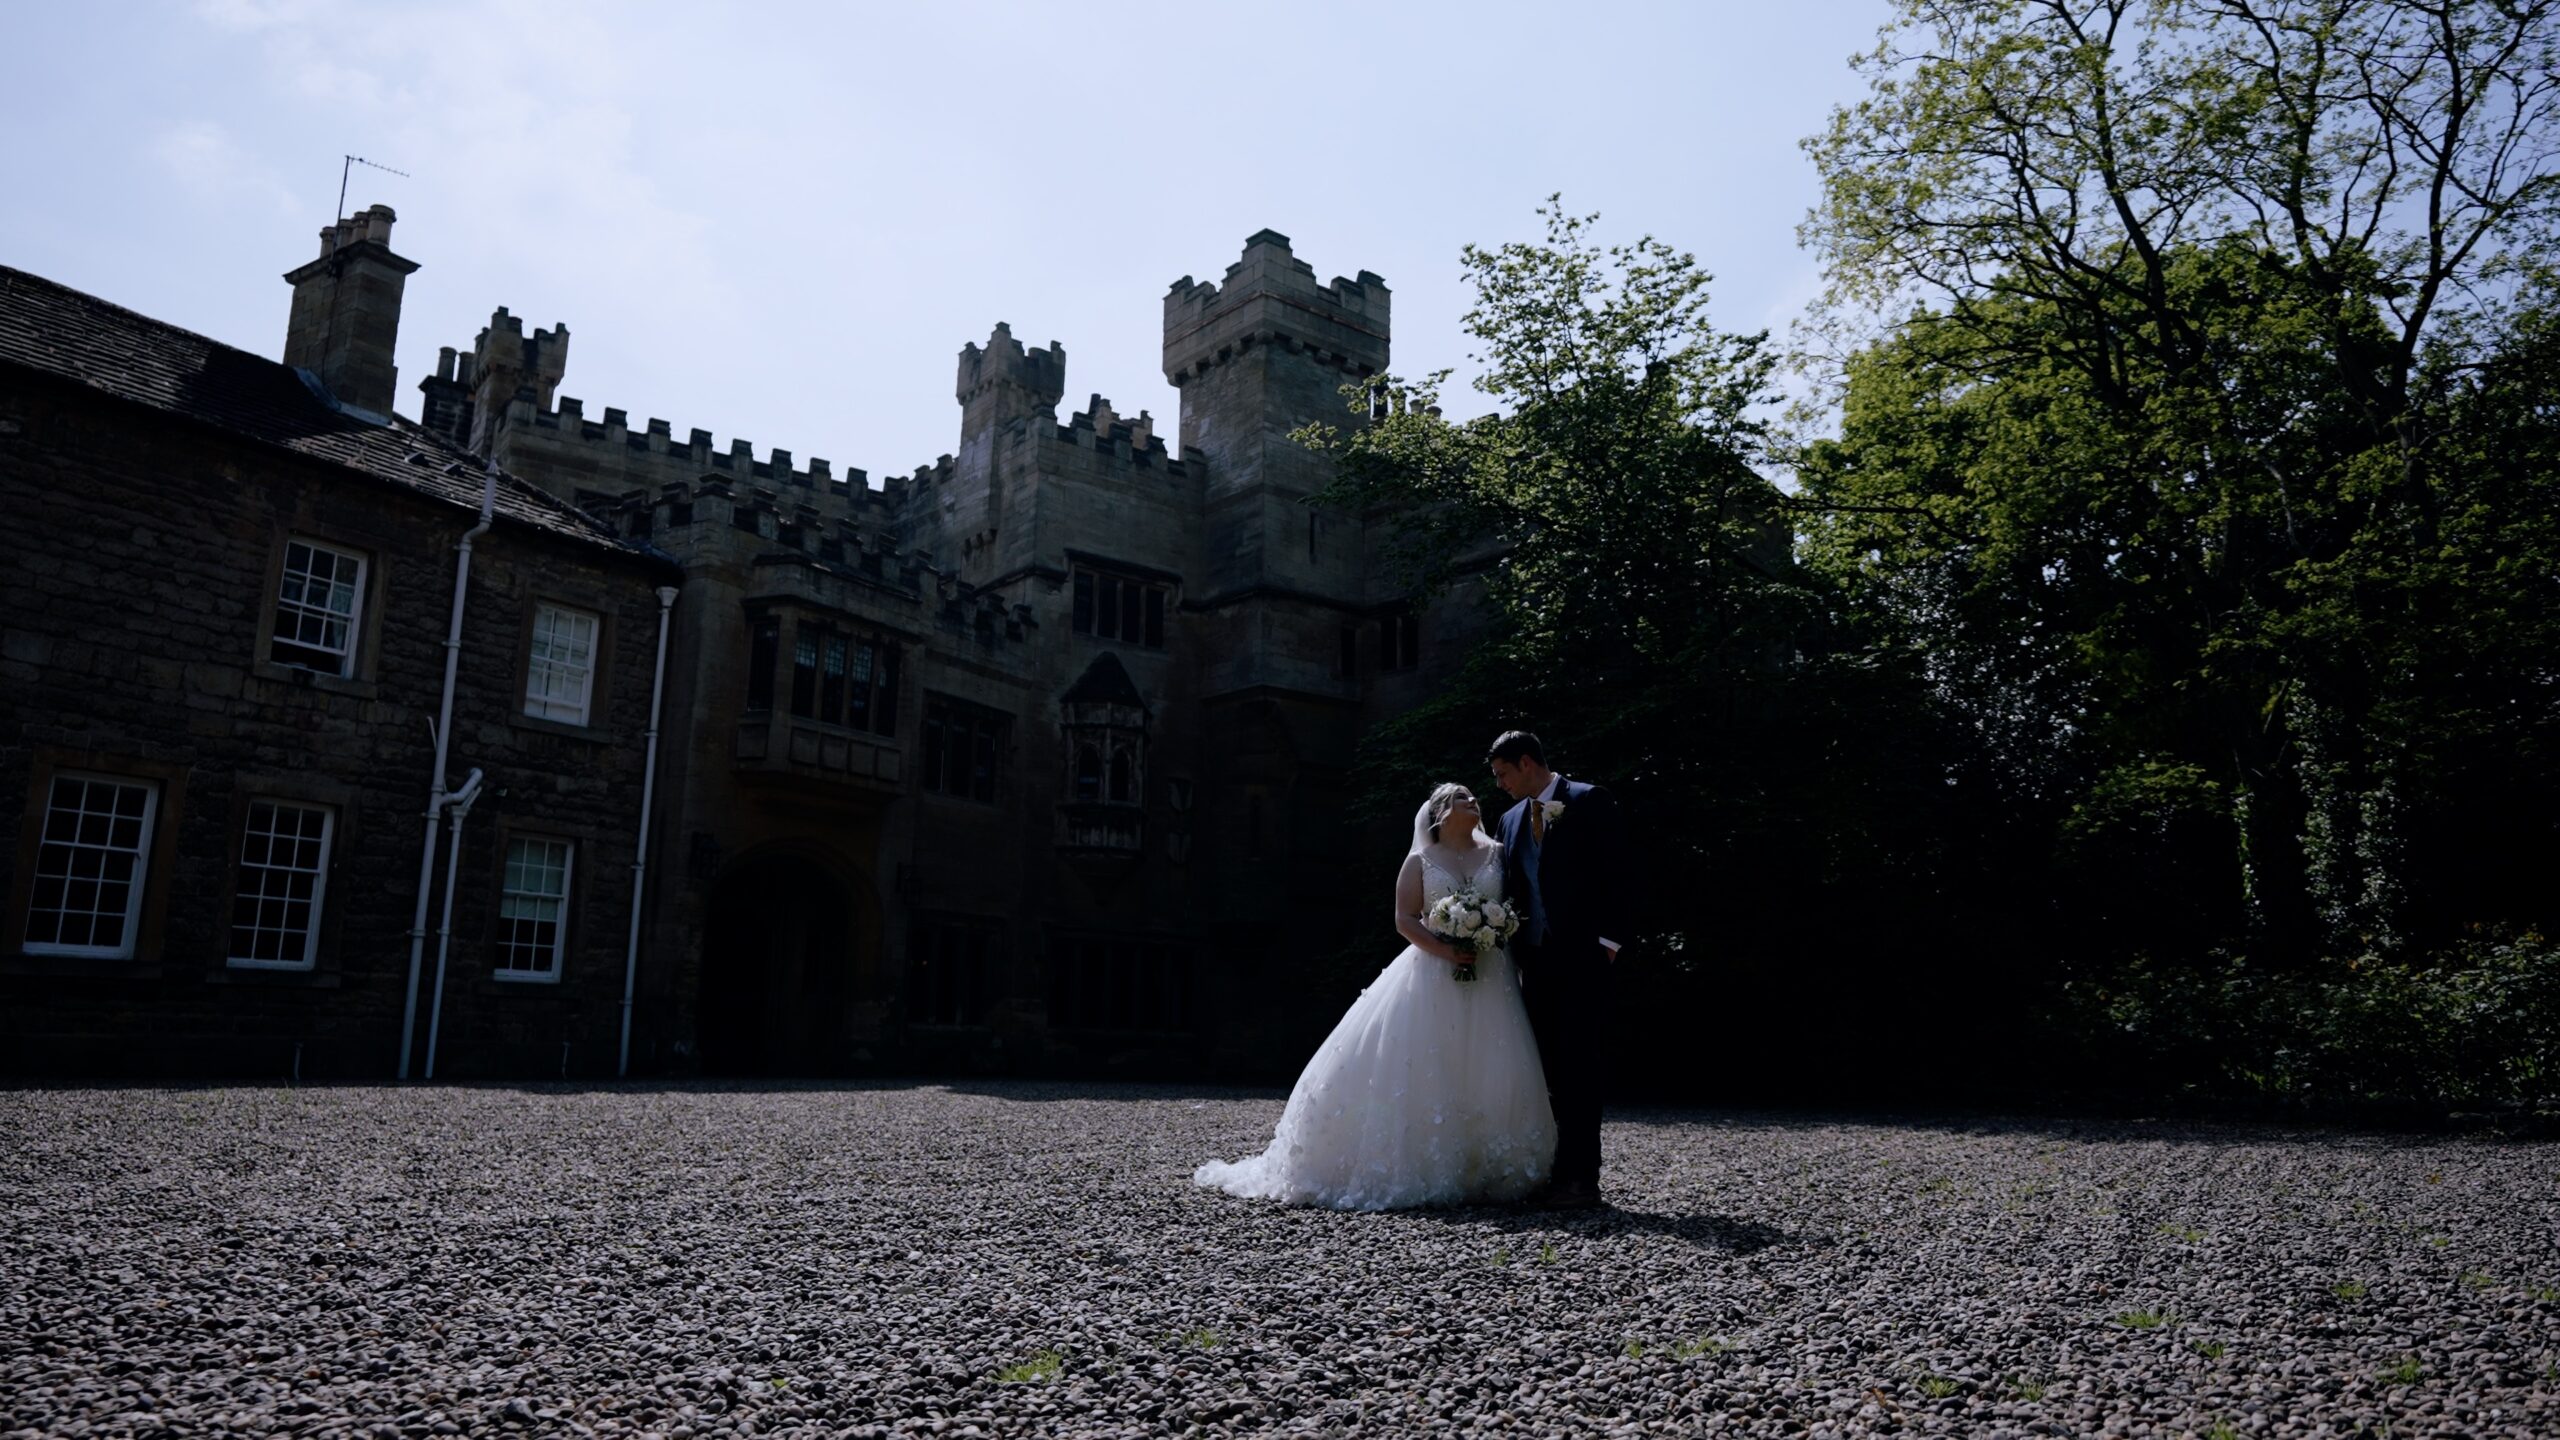 Video of wedding couple at Hooton Pagnell Hall